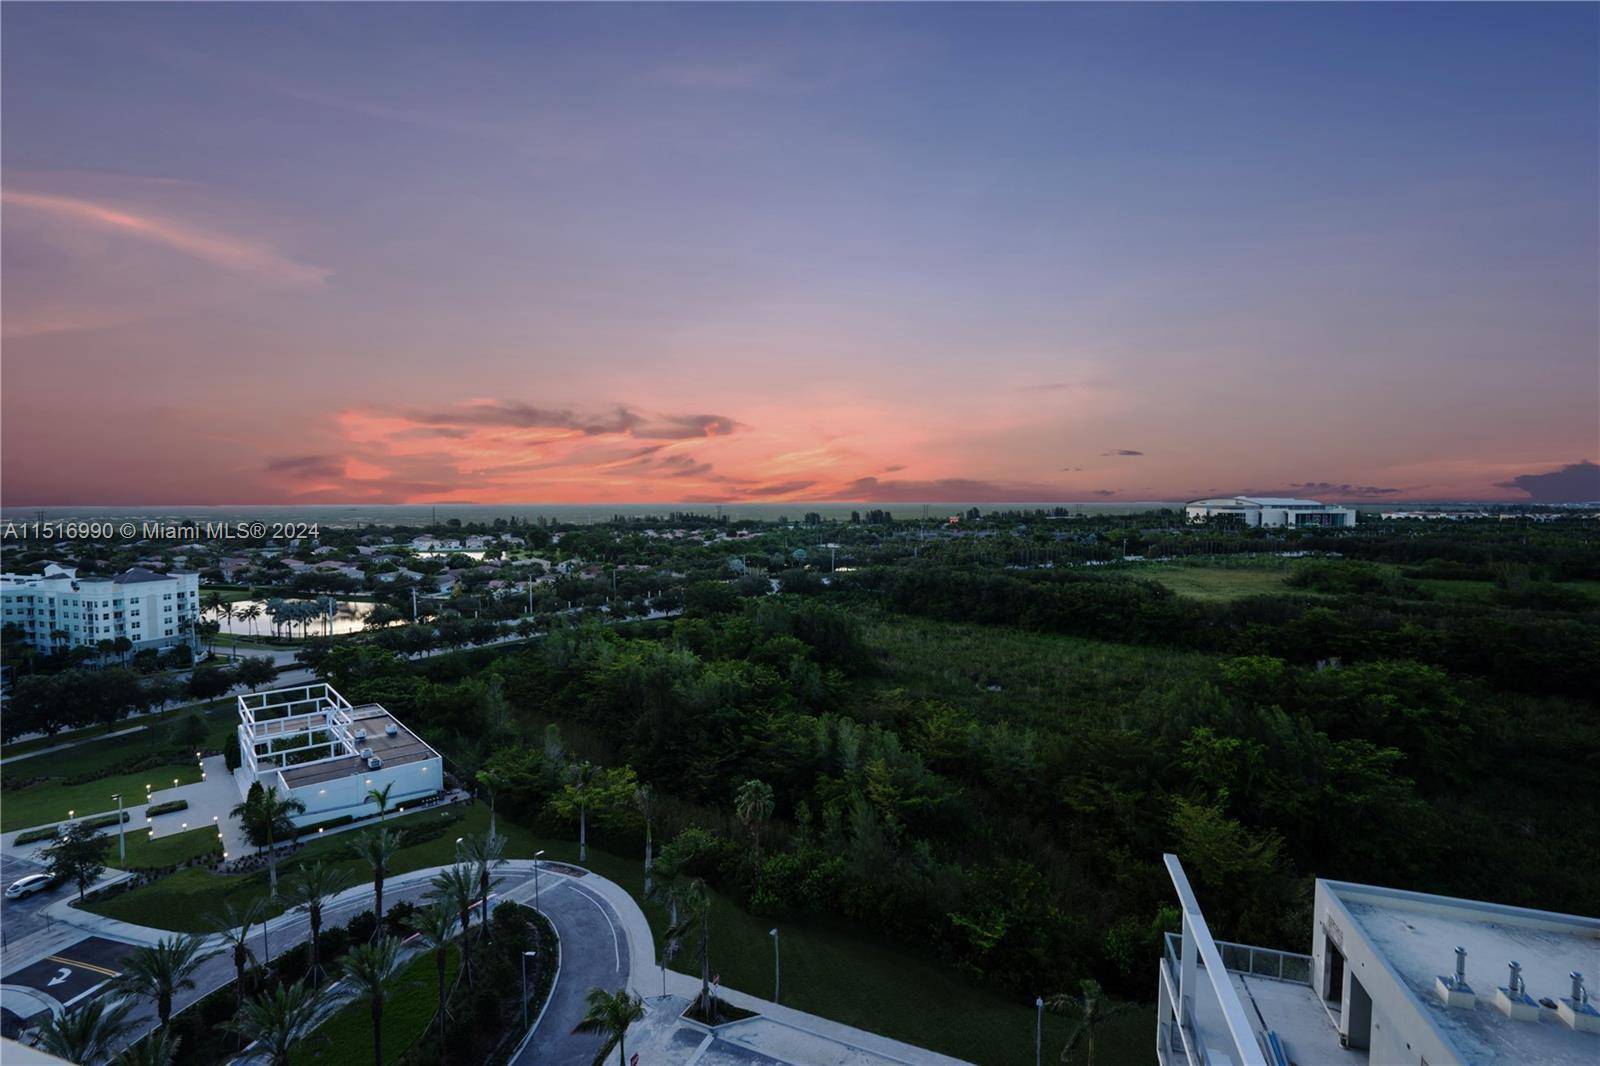 One Metropica is a lovely condominium community just west of the second most visited place in Florida, the Sawgrass Mills shopping development.